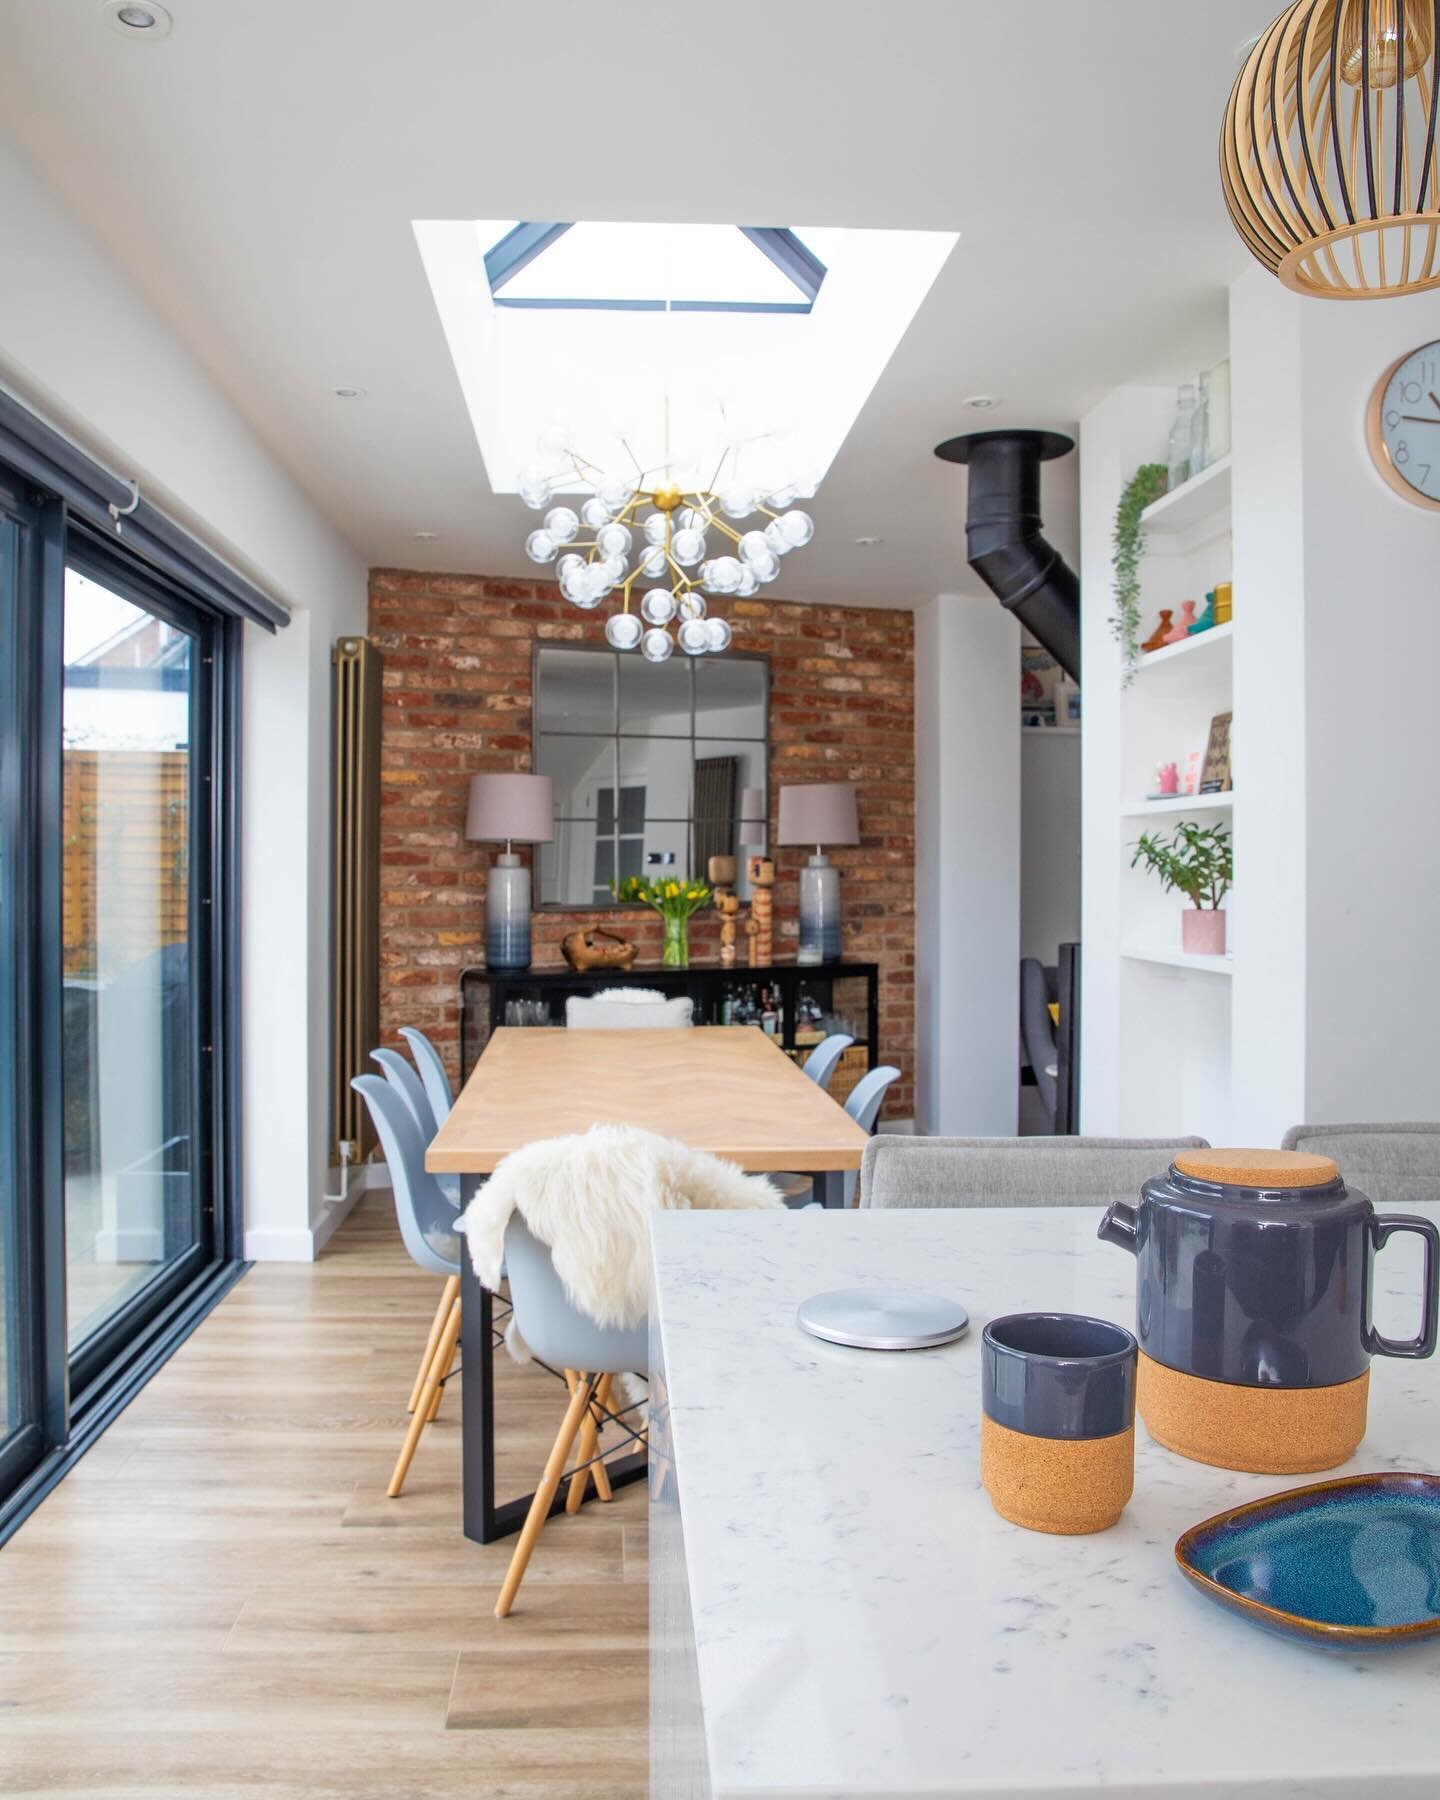 KITCHEN &bull; I do love an indoor / outdoor / kitchen / dining living / space. Sounds like I want a lot  and you would be right ! 

The kitchen had become the heart of the home rather than a scullery hidden away . We love a little al fresco dining s